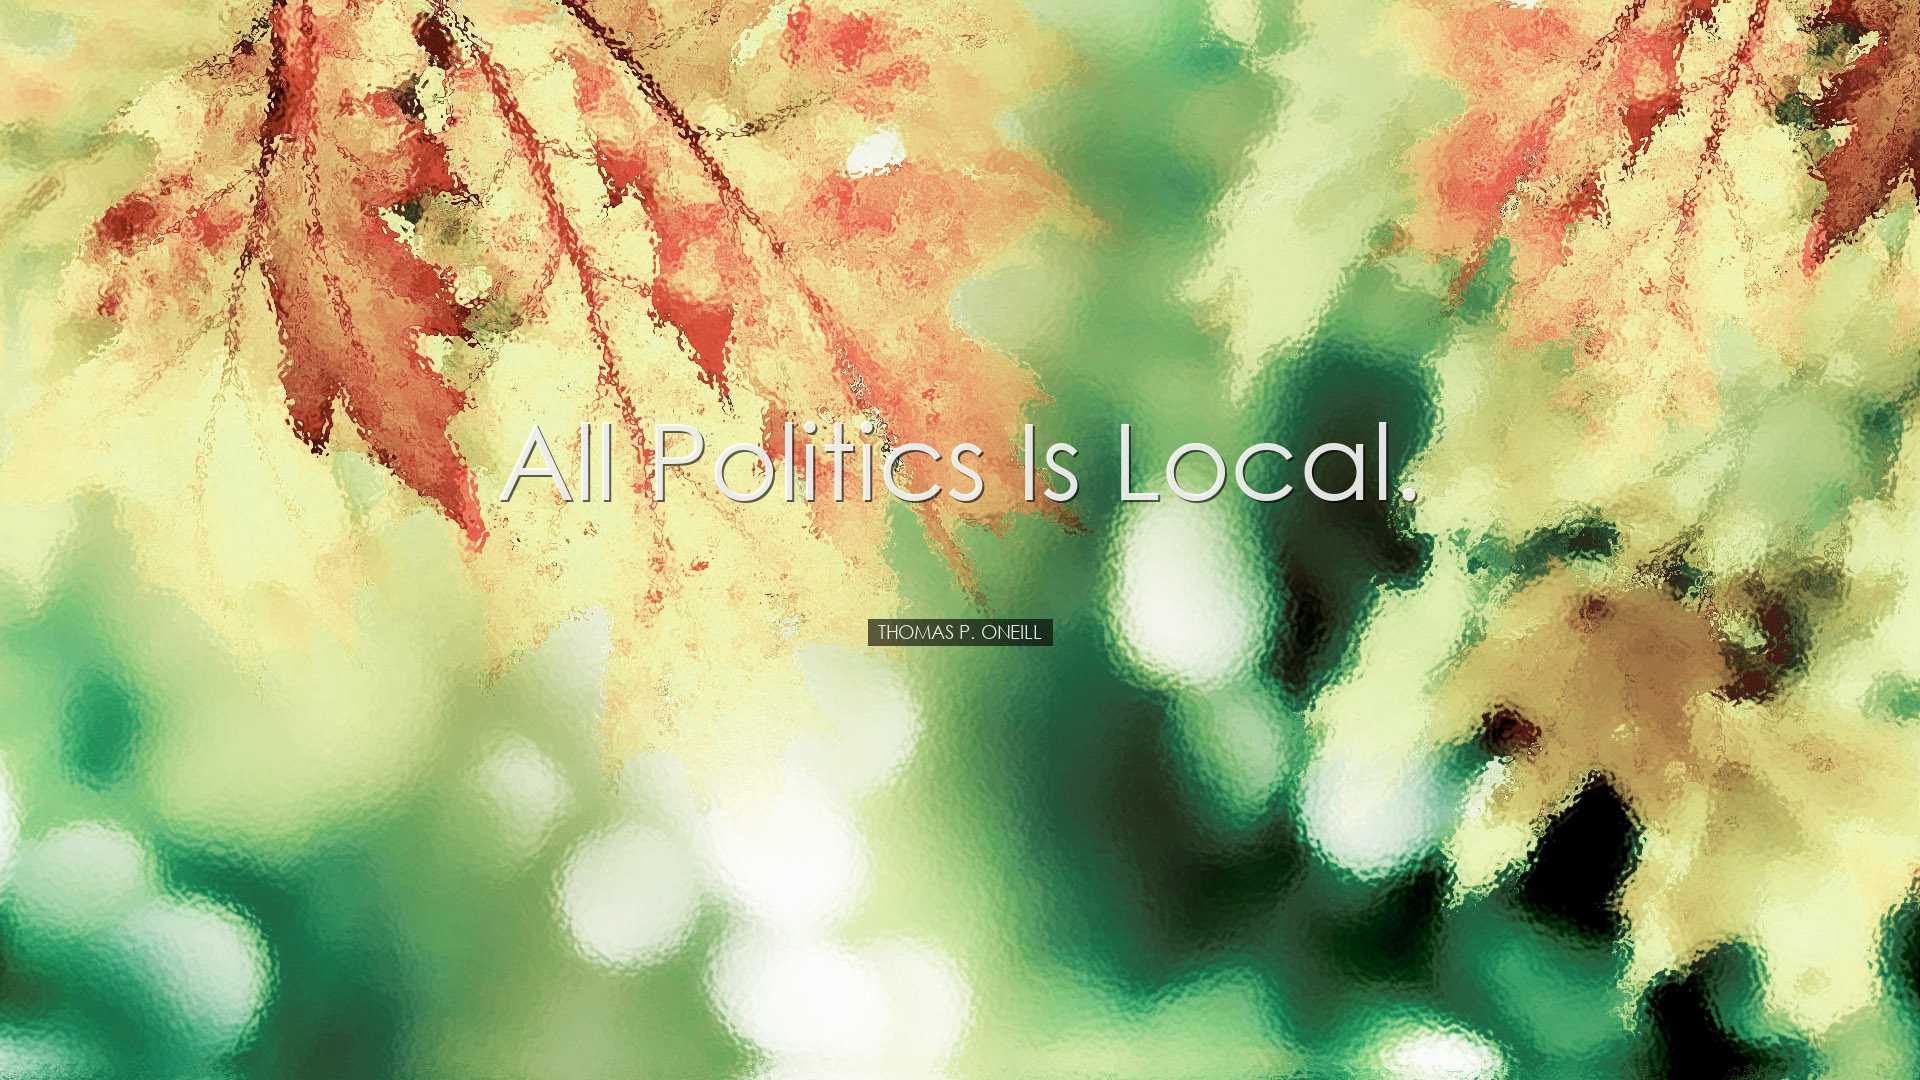 All politics is local. - Thomas P. ONeill